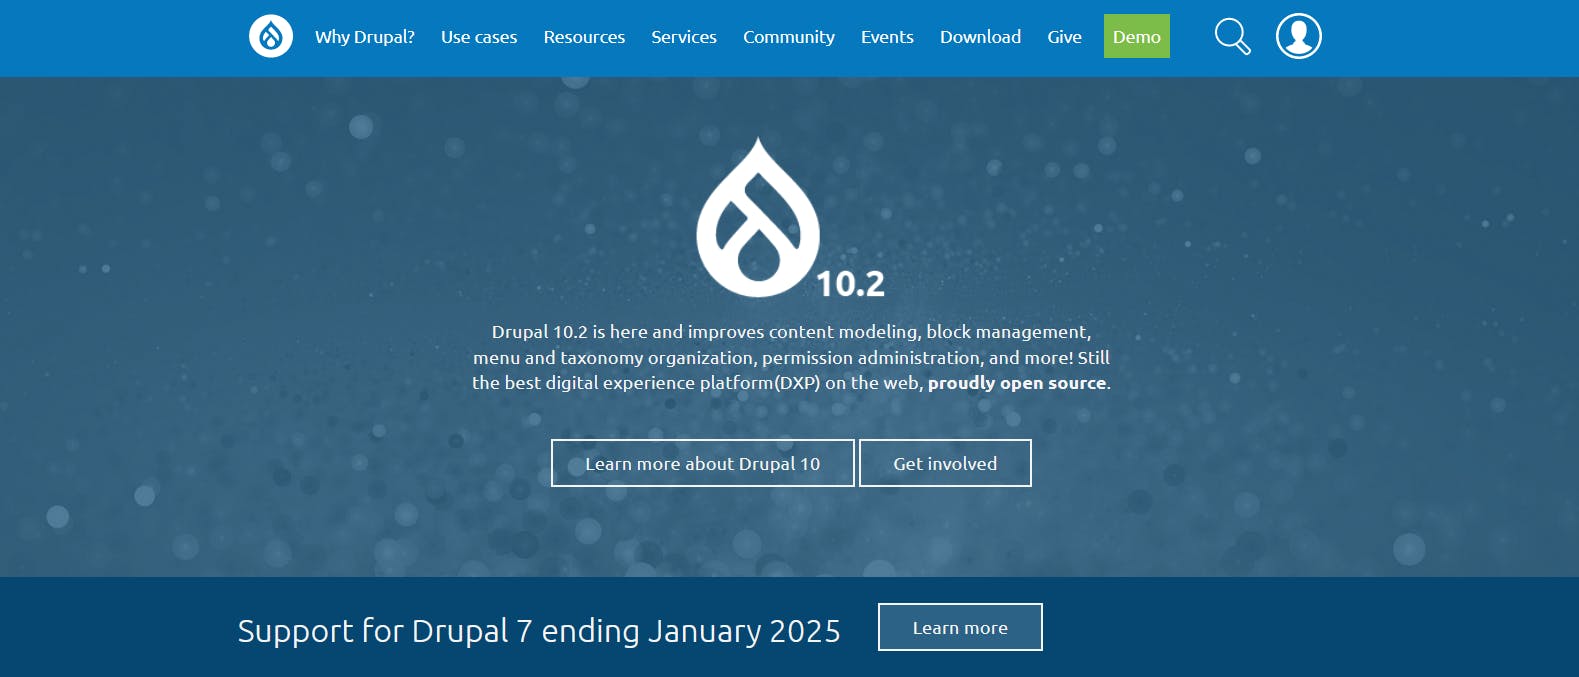 An image of Drupal CMS landing page.